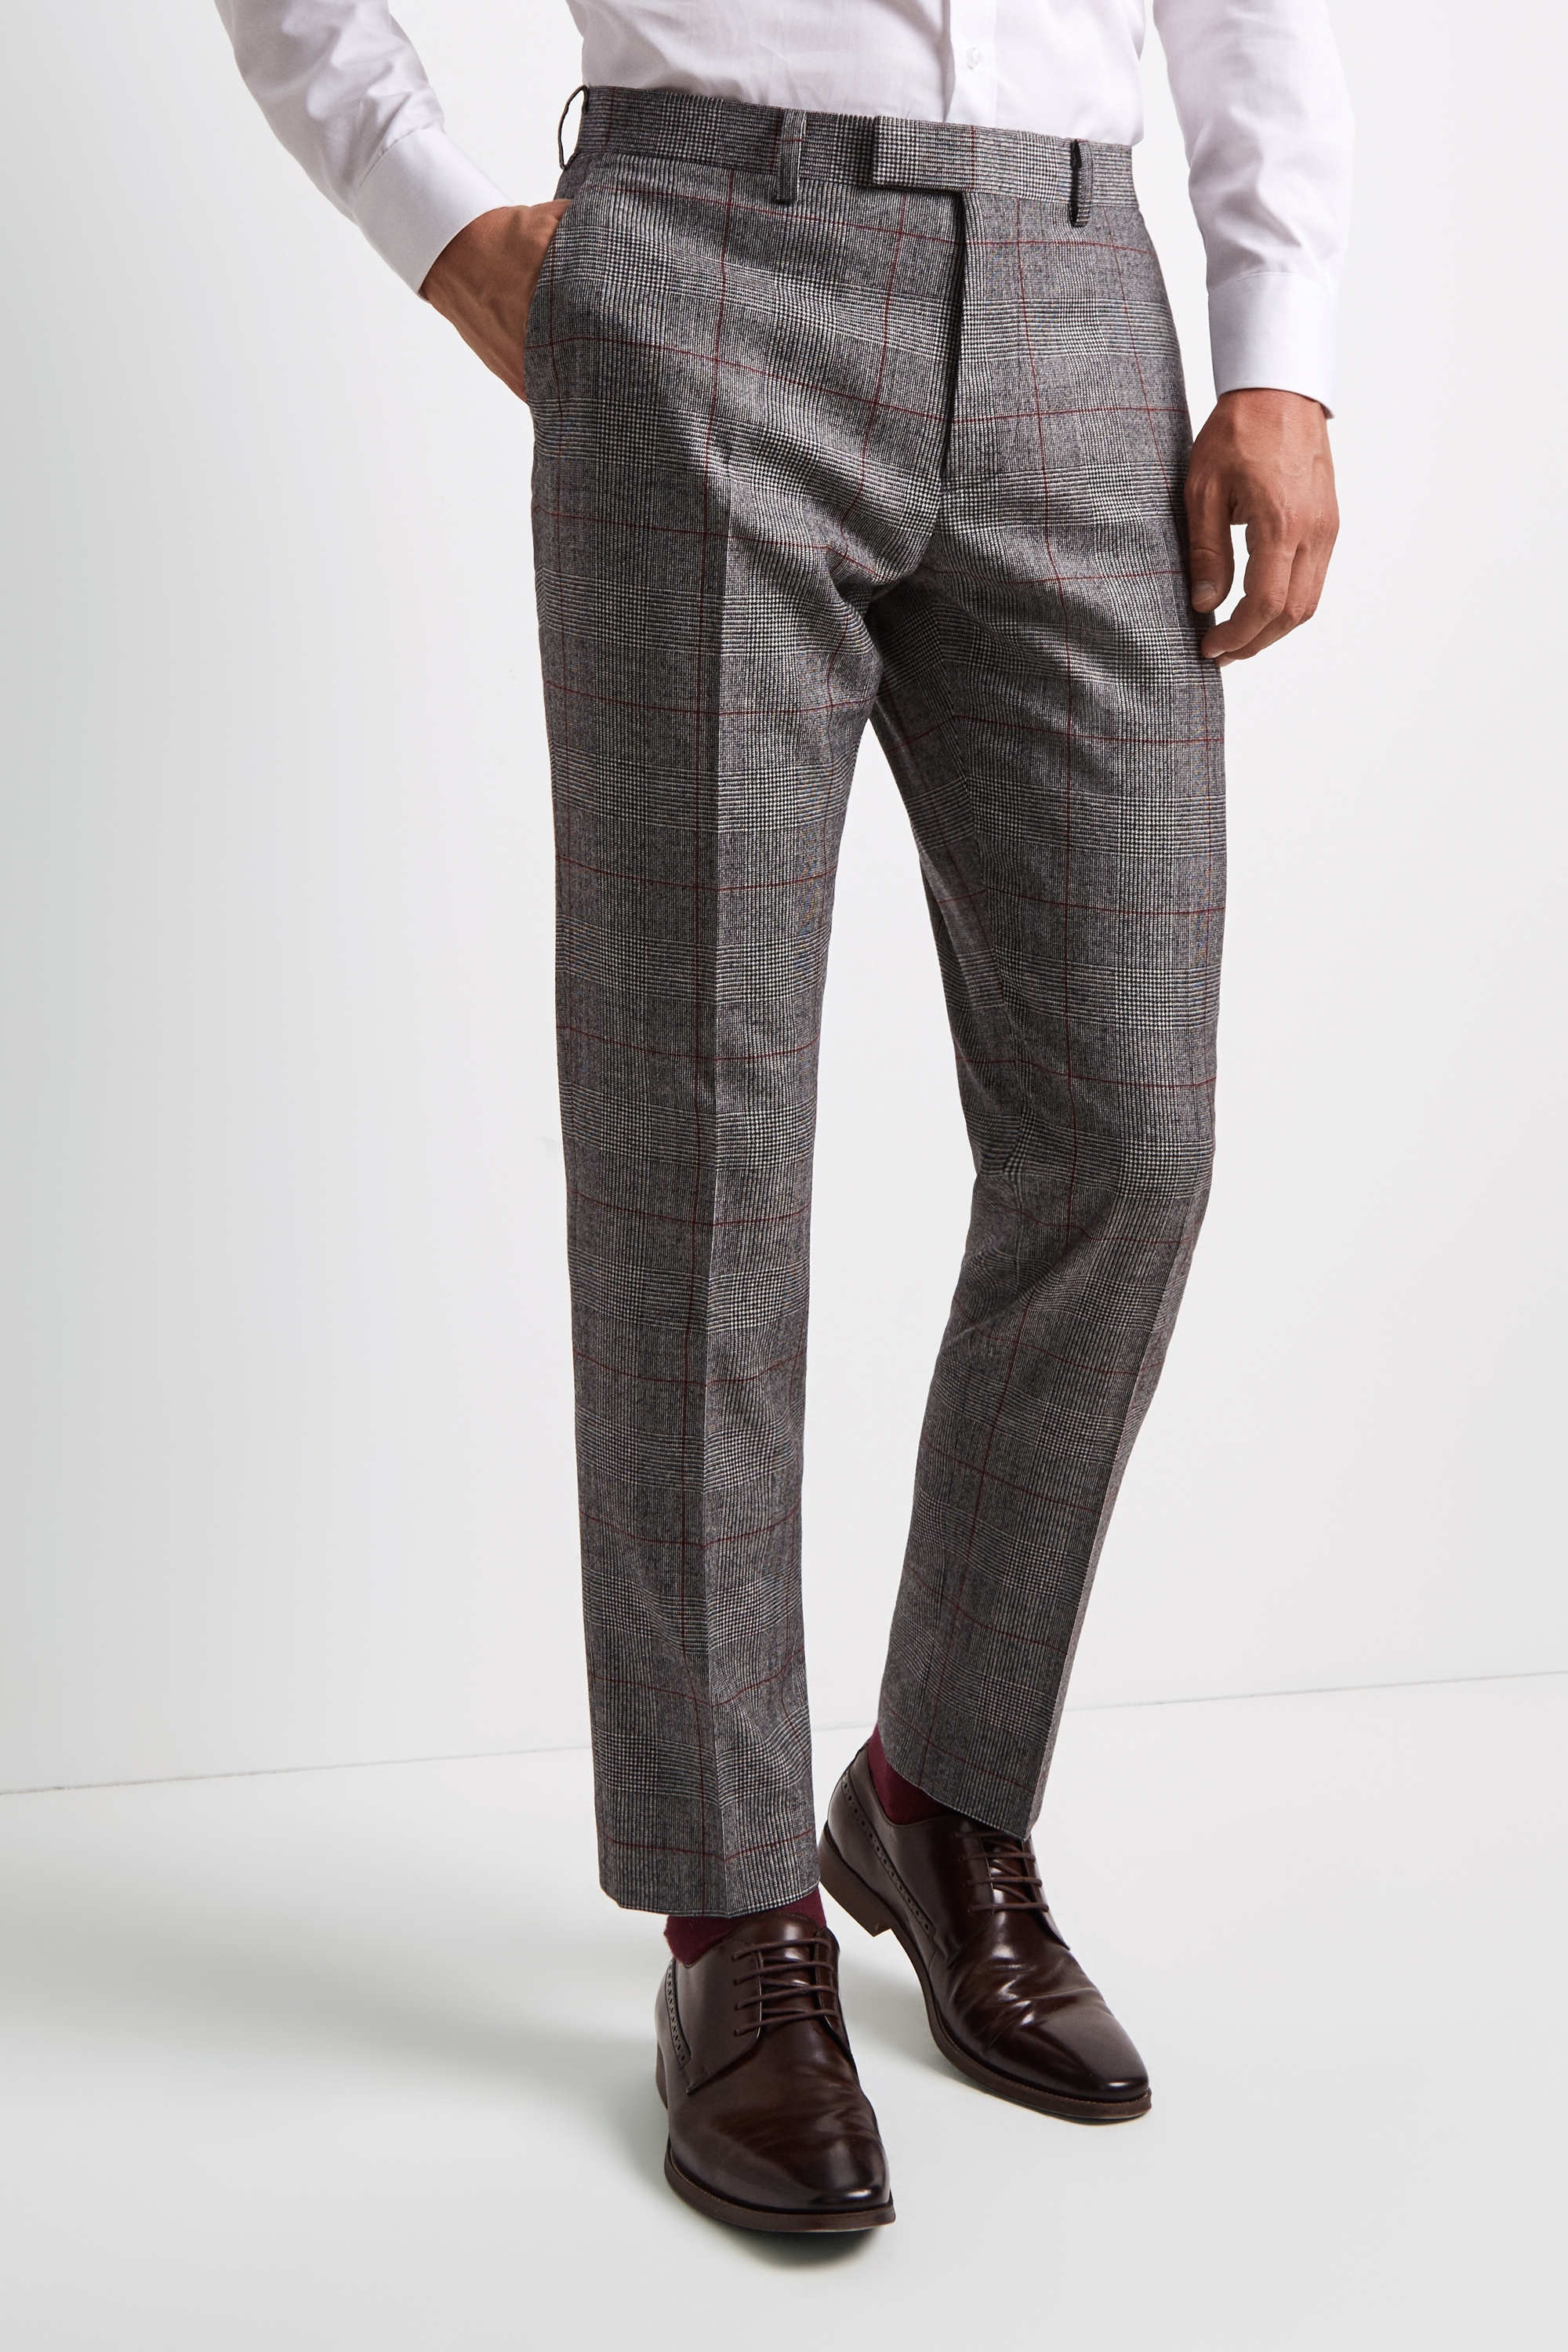 Moss 1851 Tailored Fit Black & White with Red Check Trousers